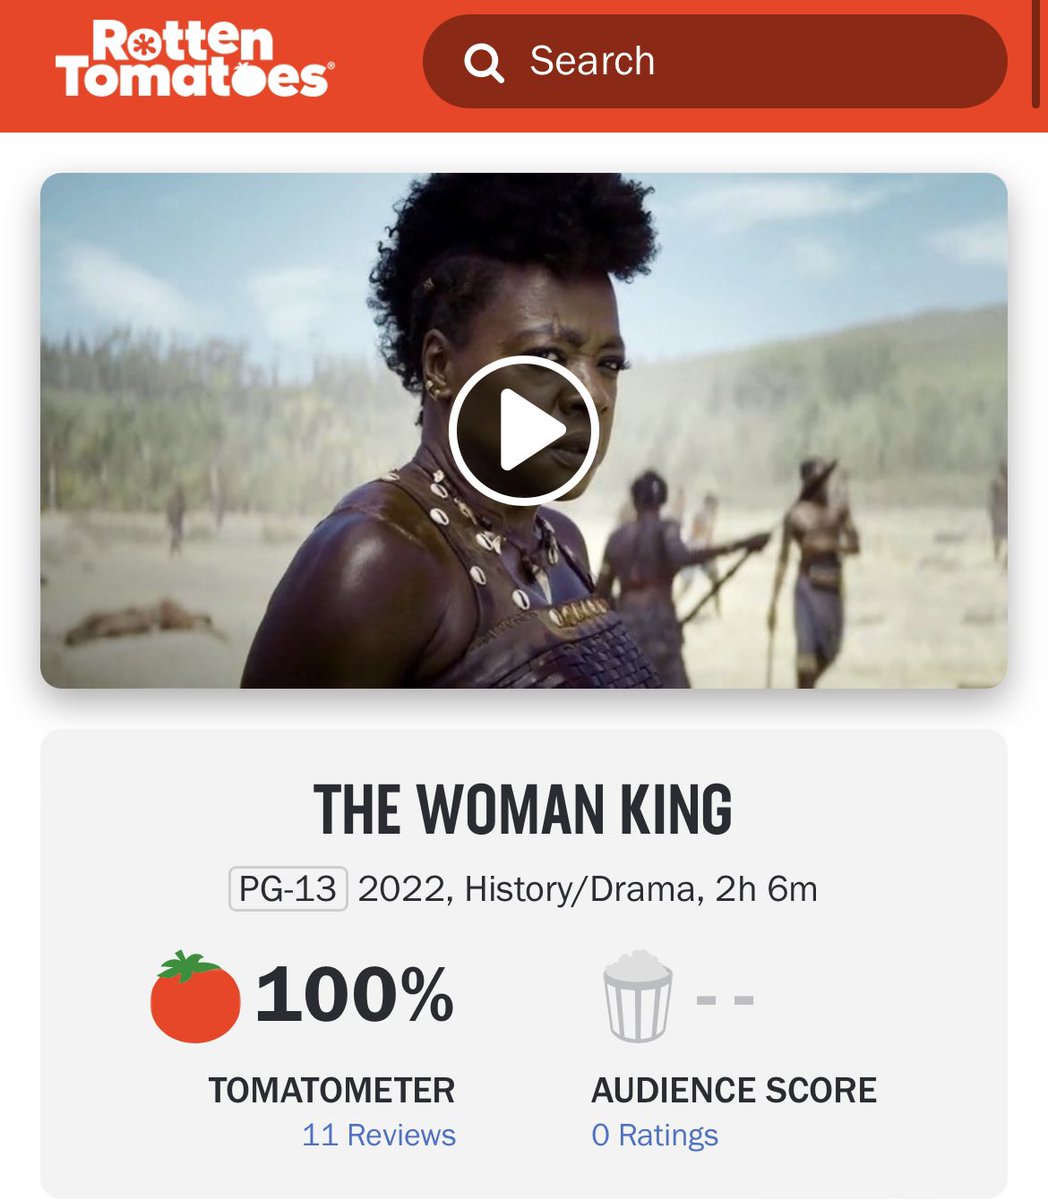 #TheWomanKing debuts with a Rotten Tomatoes score of 100%.